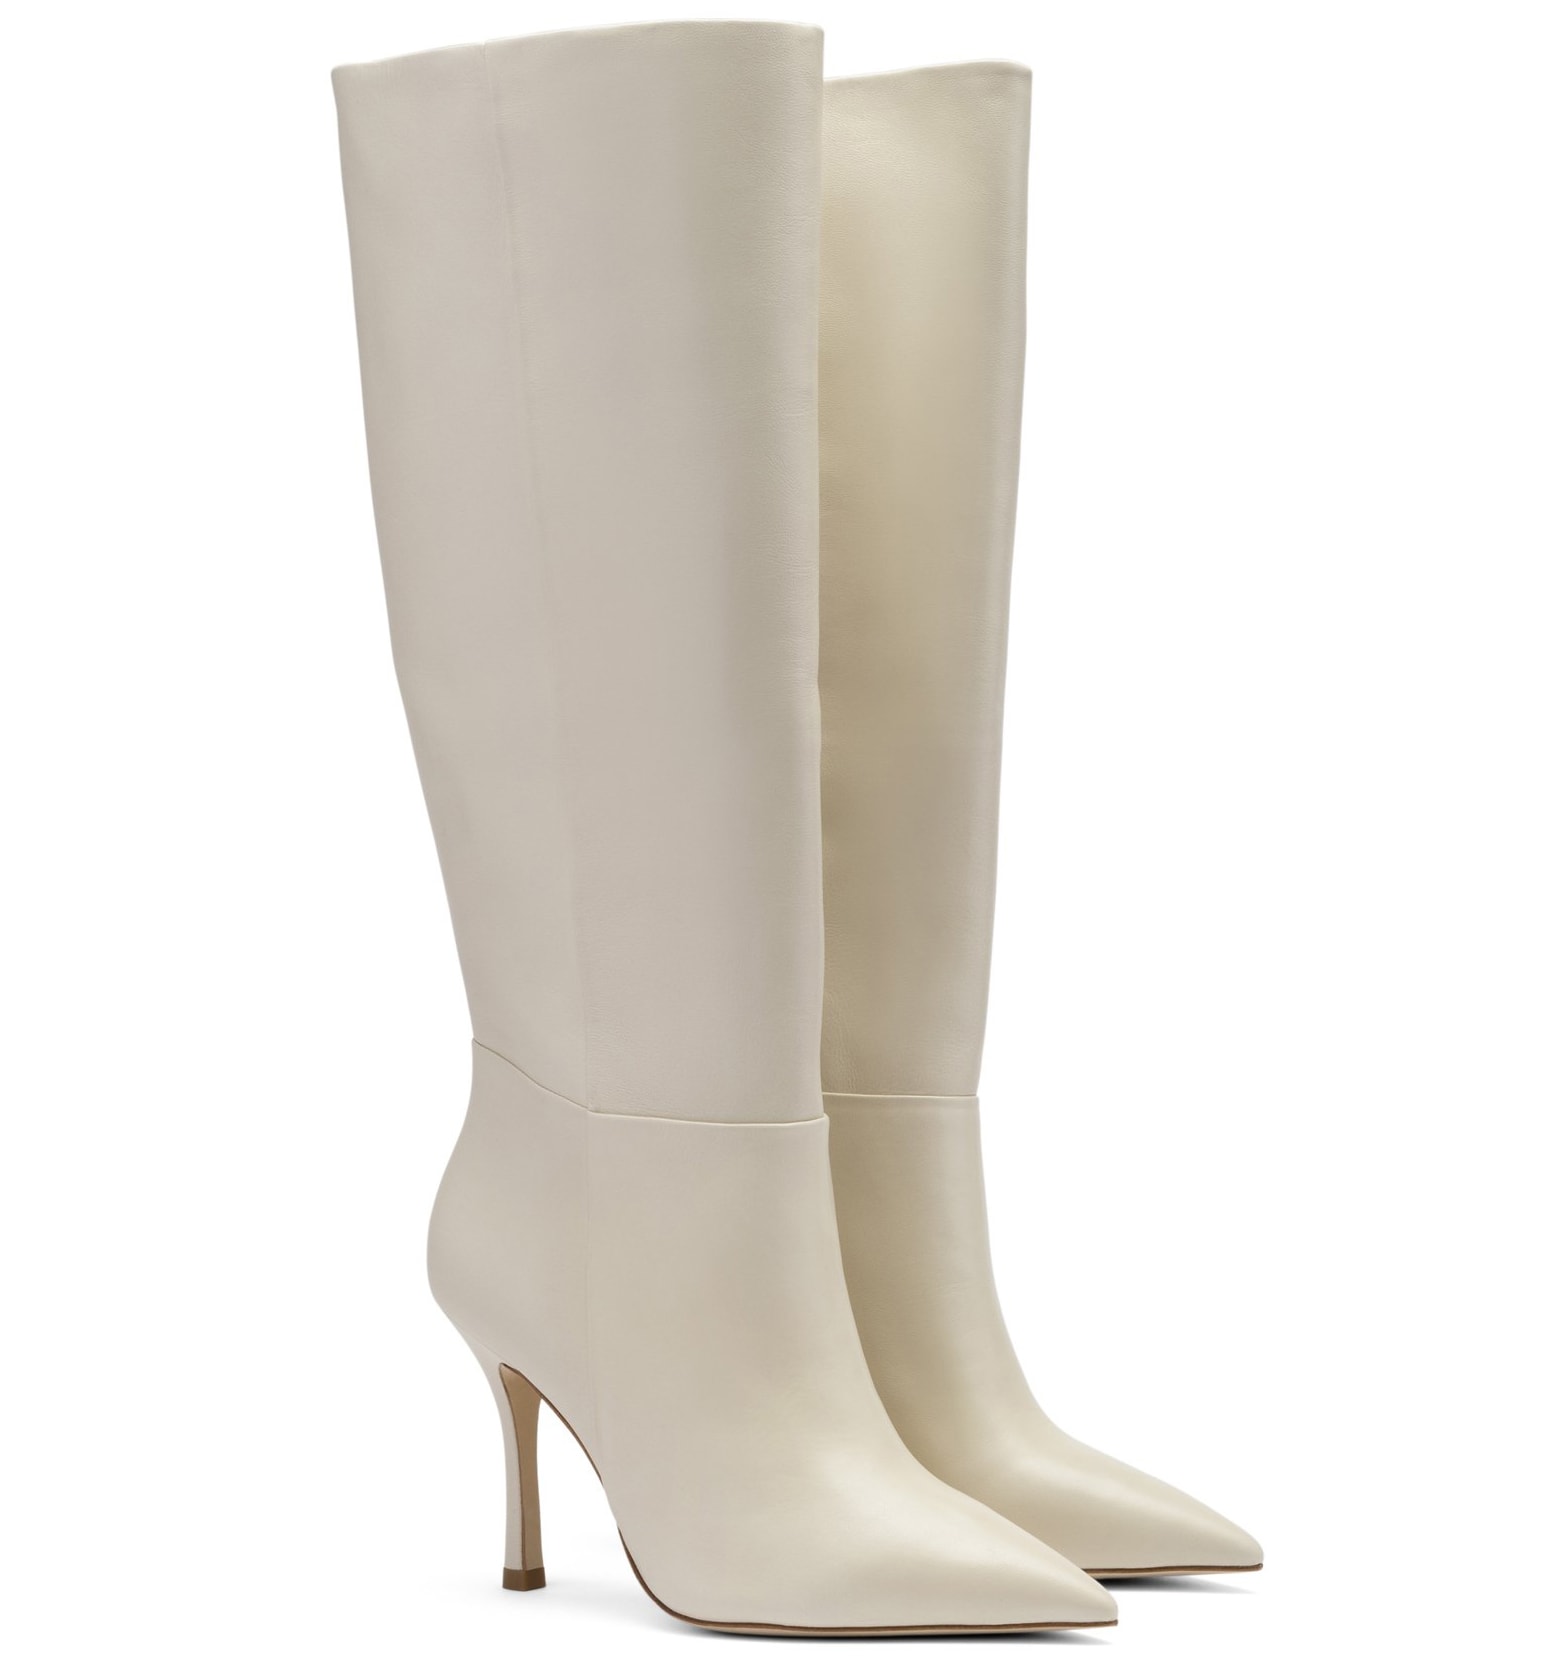 Handcrafted in Brazil from ivory leather, the Larroude Kate knee-high boots feature pointy toes and stiletto heels